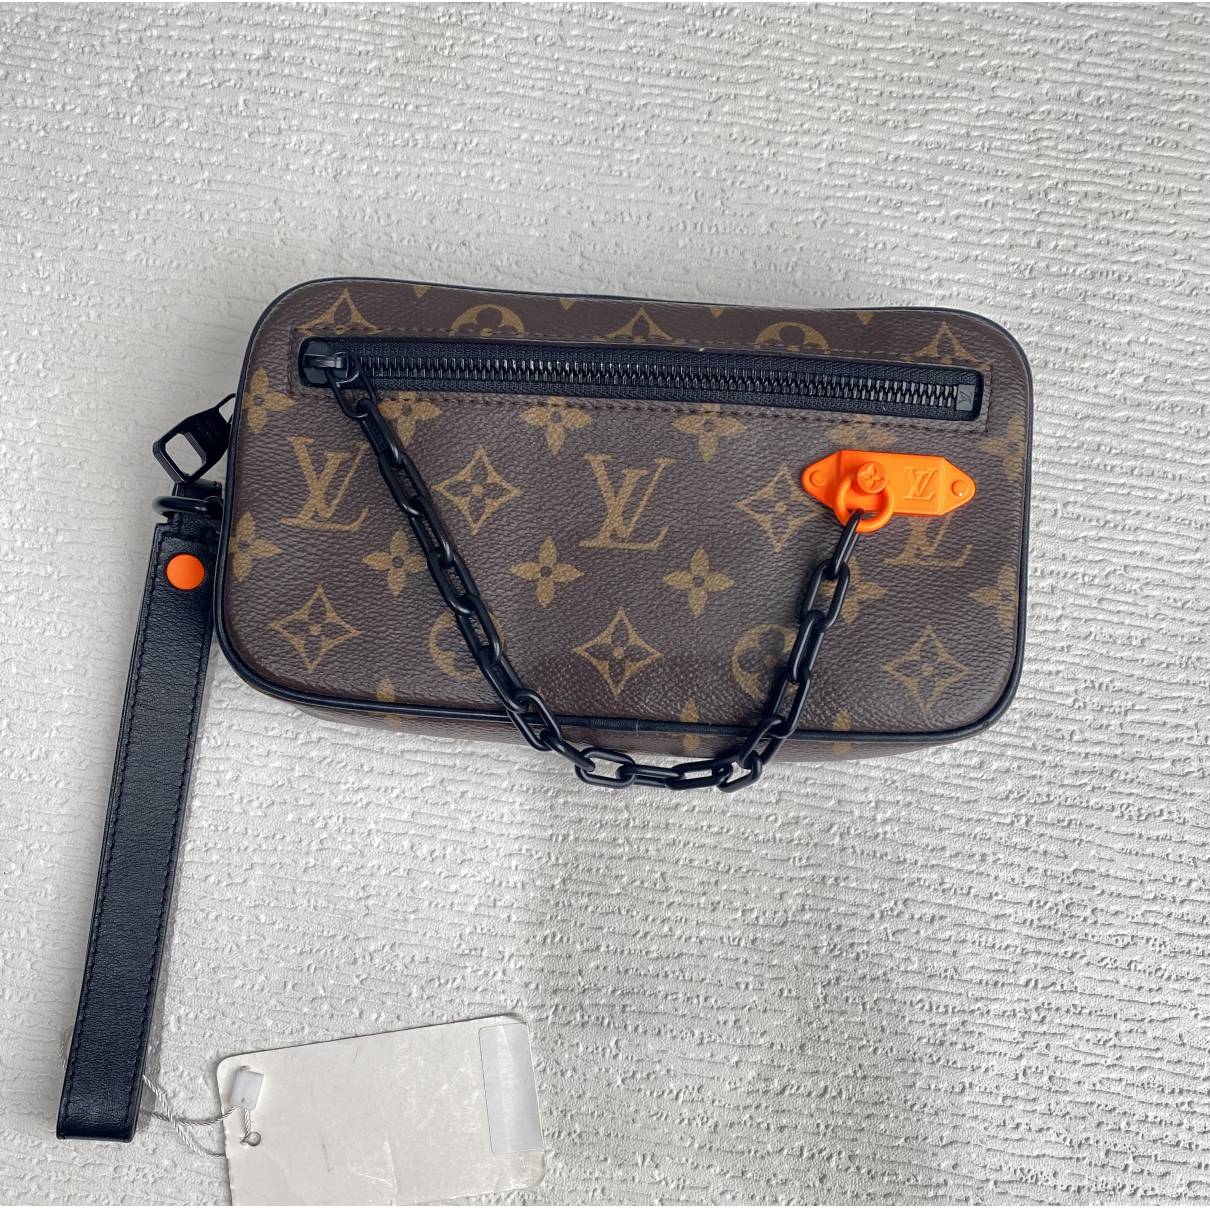 Louis Vuitton - Authenticated Pochette Accessoire Clutch Bag - Leather Brown for Women, Very Good Condition